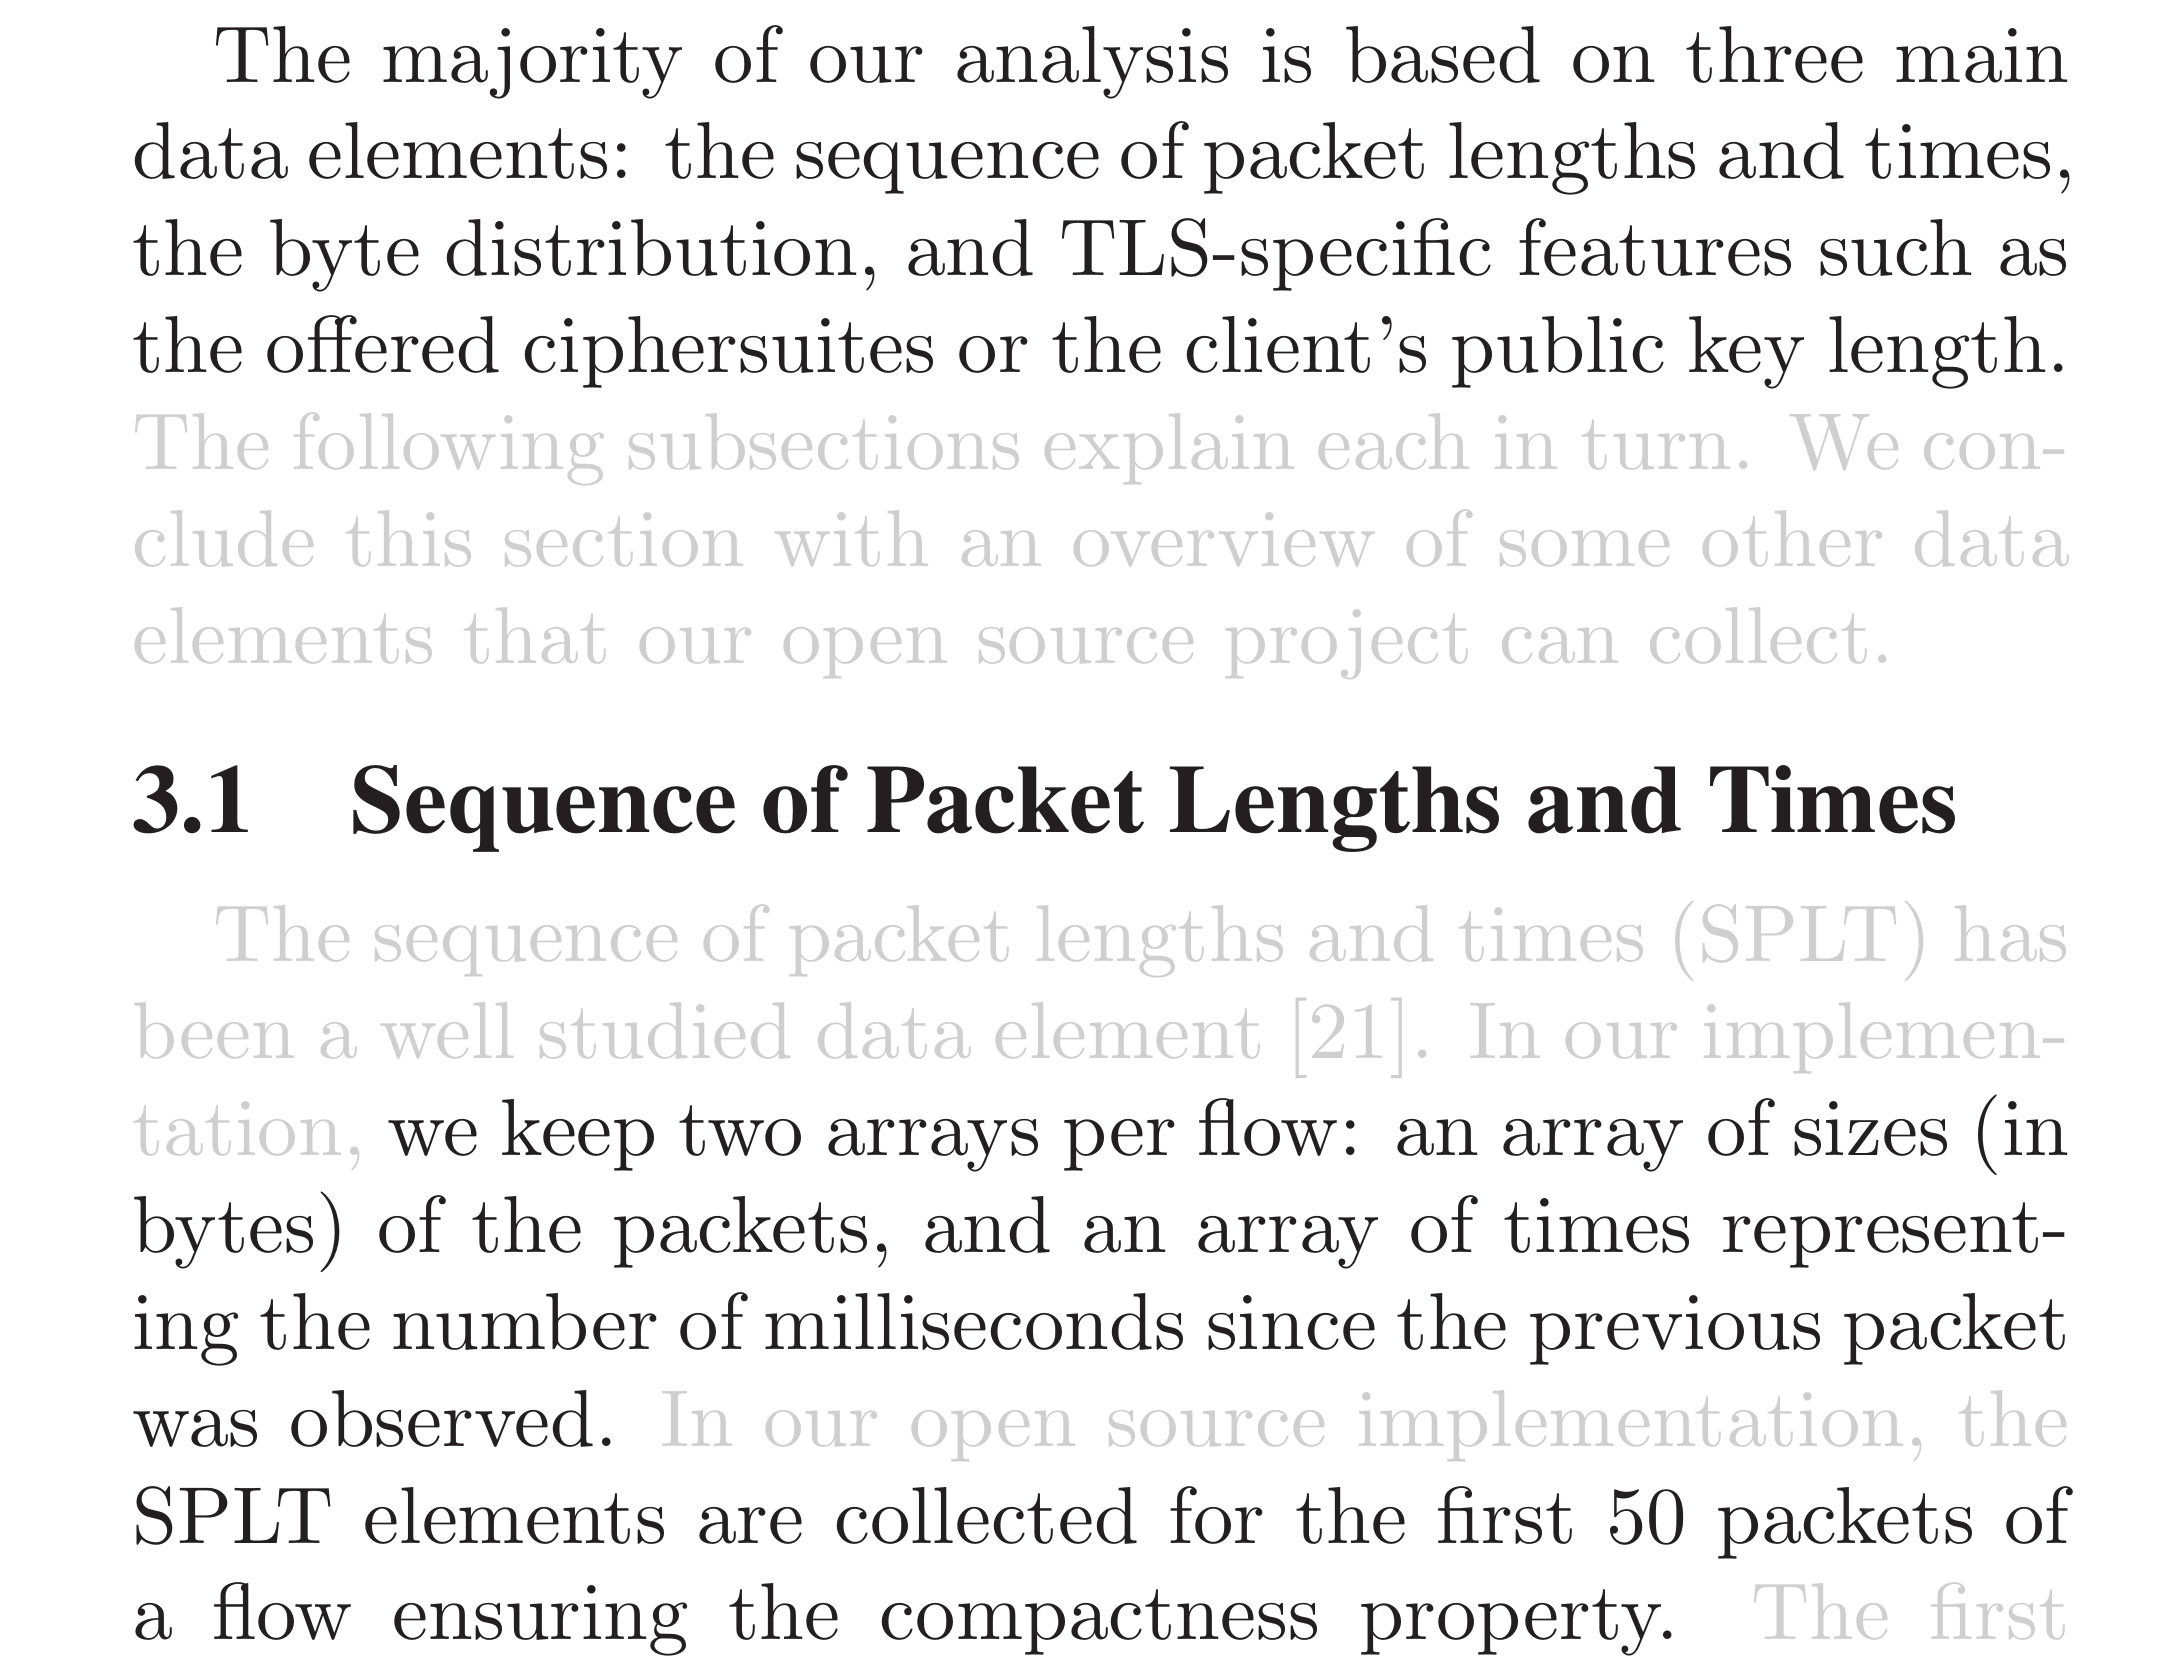 The majority of our analysis is based on three main data elements: the sequence of packet lengths and times, the byte distribution, and TLS-specific features such as the offered ciphersuites or the client’s public key length. The following subsections explain each in turn. We conclude this section with an overview of some other data elements that our open source project can collect.

3.1  Sequence of Packet Lengths and Times.
The sequence of packet lengths and times (SPLT) has been a well studied data element. In our implementation, we keep two arrays per flow: an array of sizes (in bytes) of the packets, and an array of times representing the number of milliseconds since the previous packet was observed. In our open source implementation, the SPLT elements are collected for the first 50 packets of
a flow ensuring the compactness property.  The first